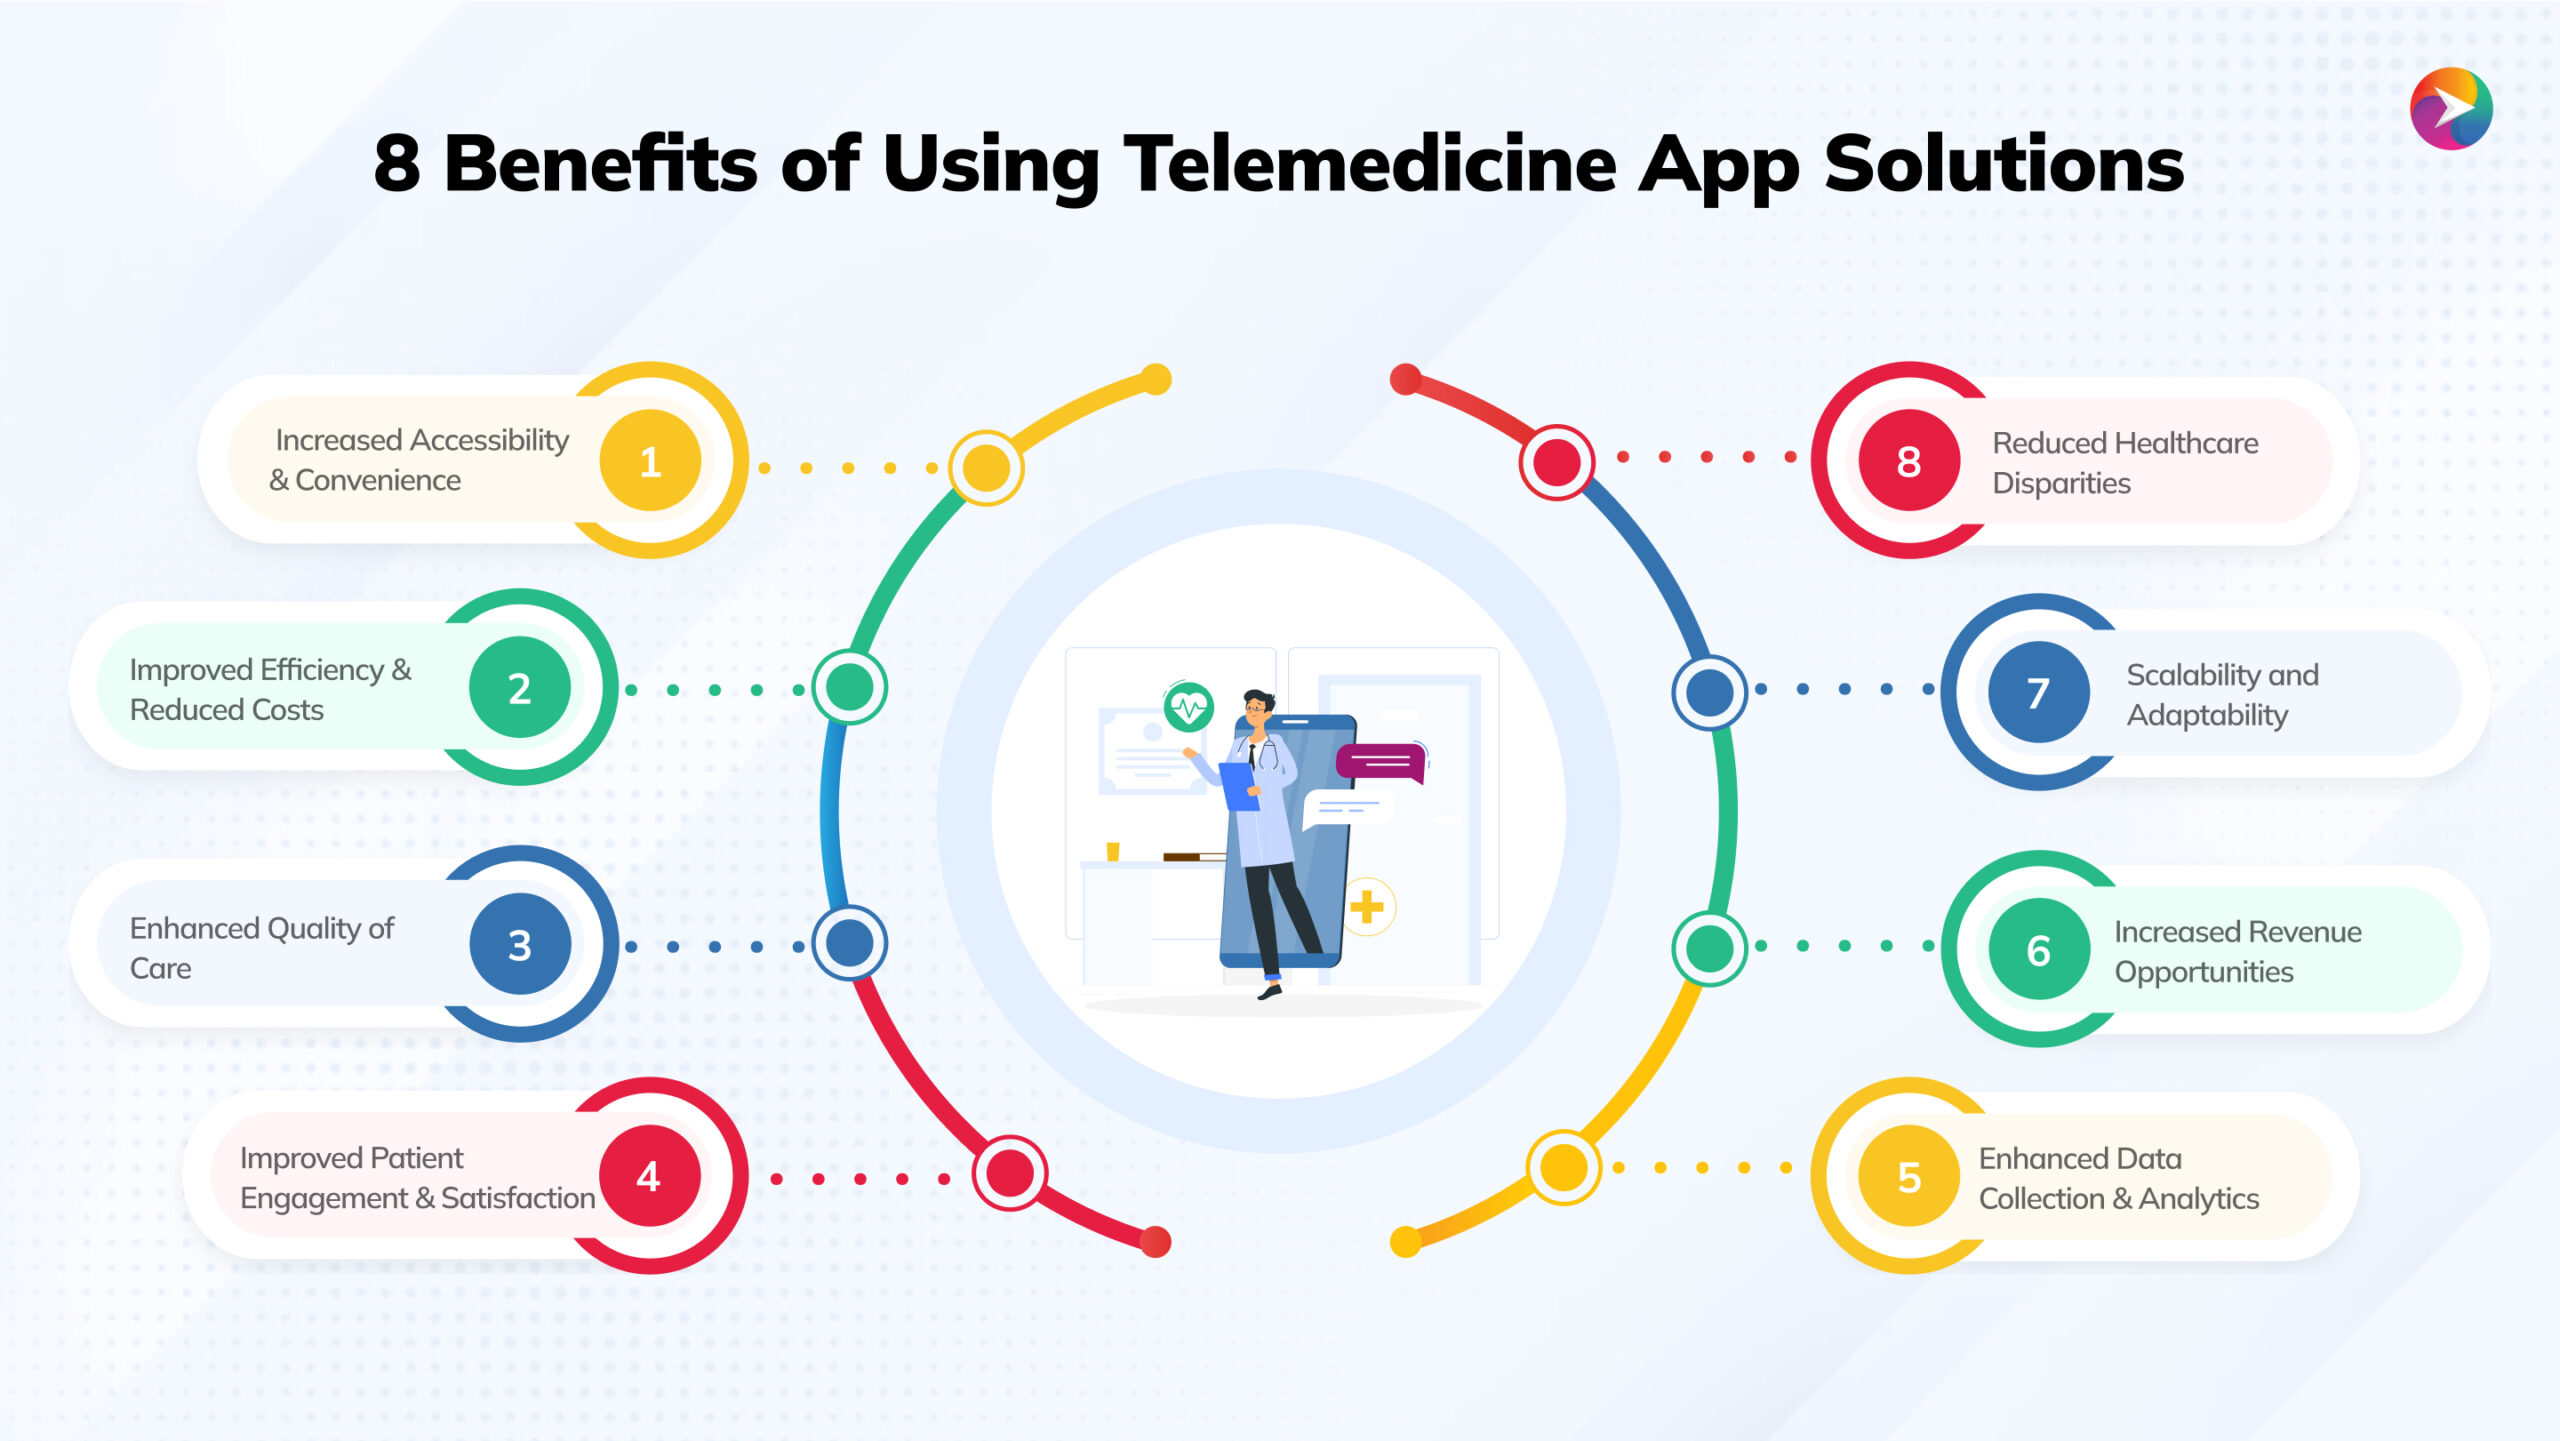 This Image contains the heading "8 Benefits of Using Telemedicine App Solutions" on the top and benefits written circularly in a different color. The image is designed by Apponward Technologies. 